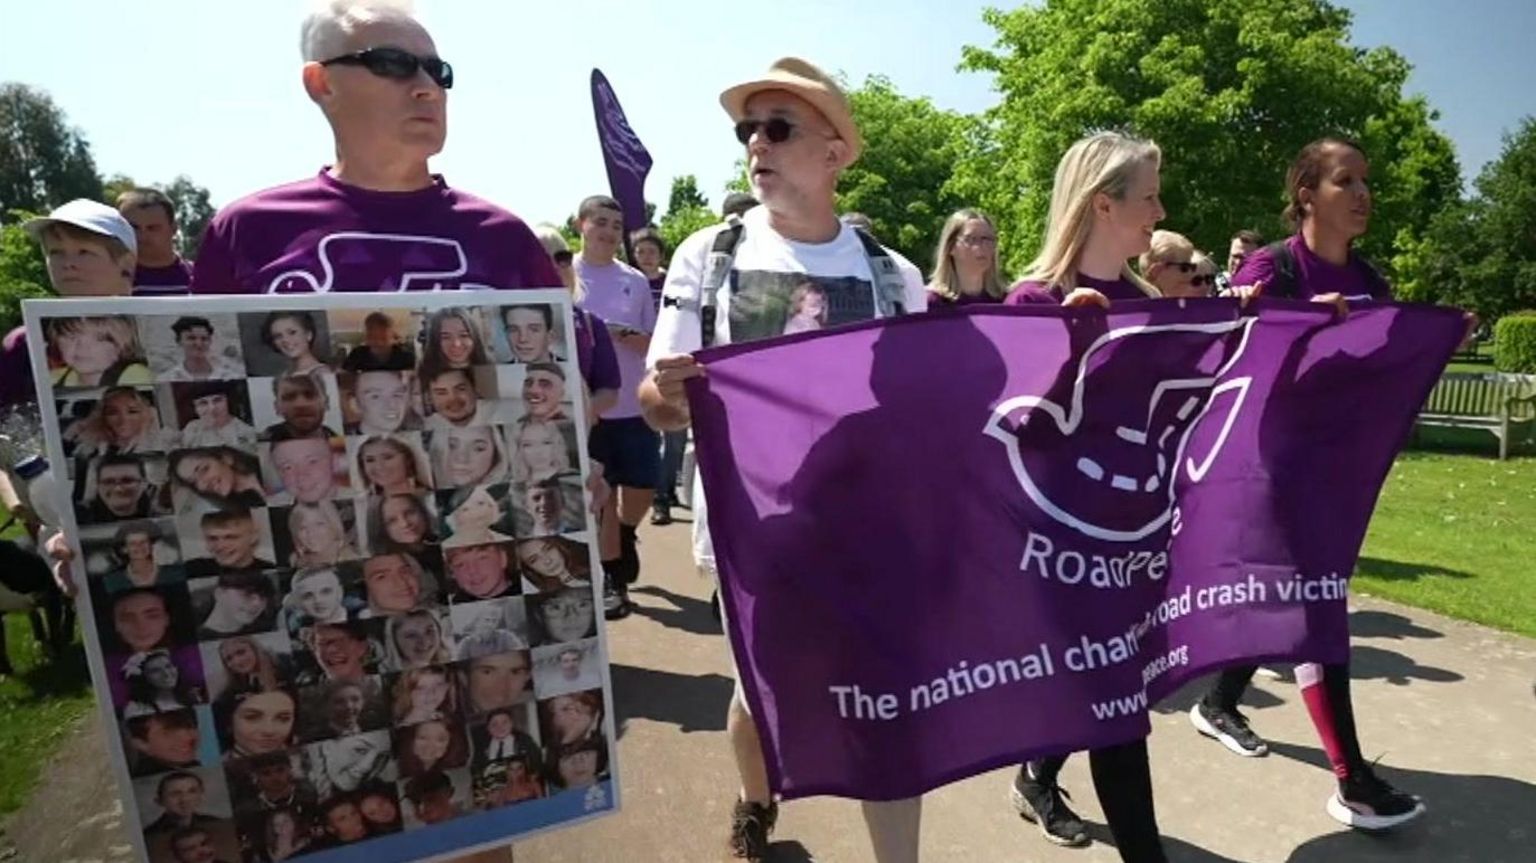 Family members walking carrying banners and montage images of young car crash victims